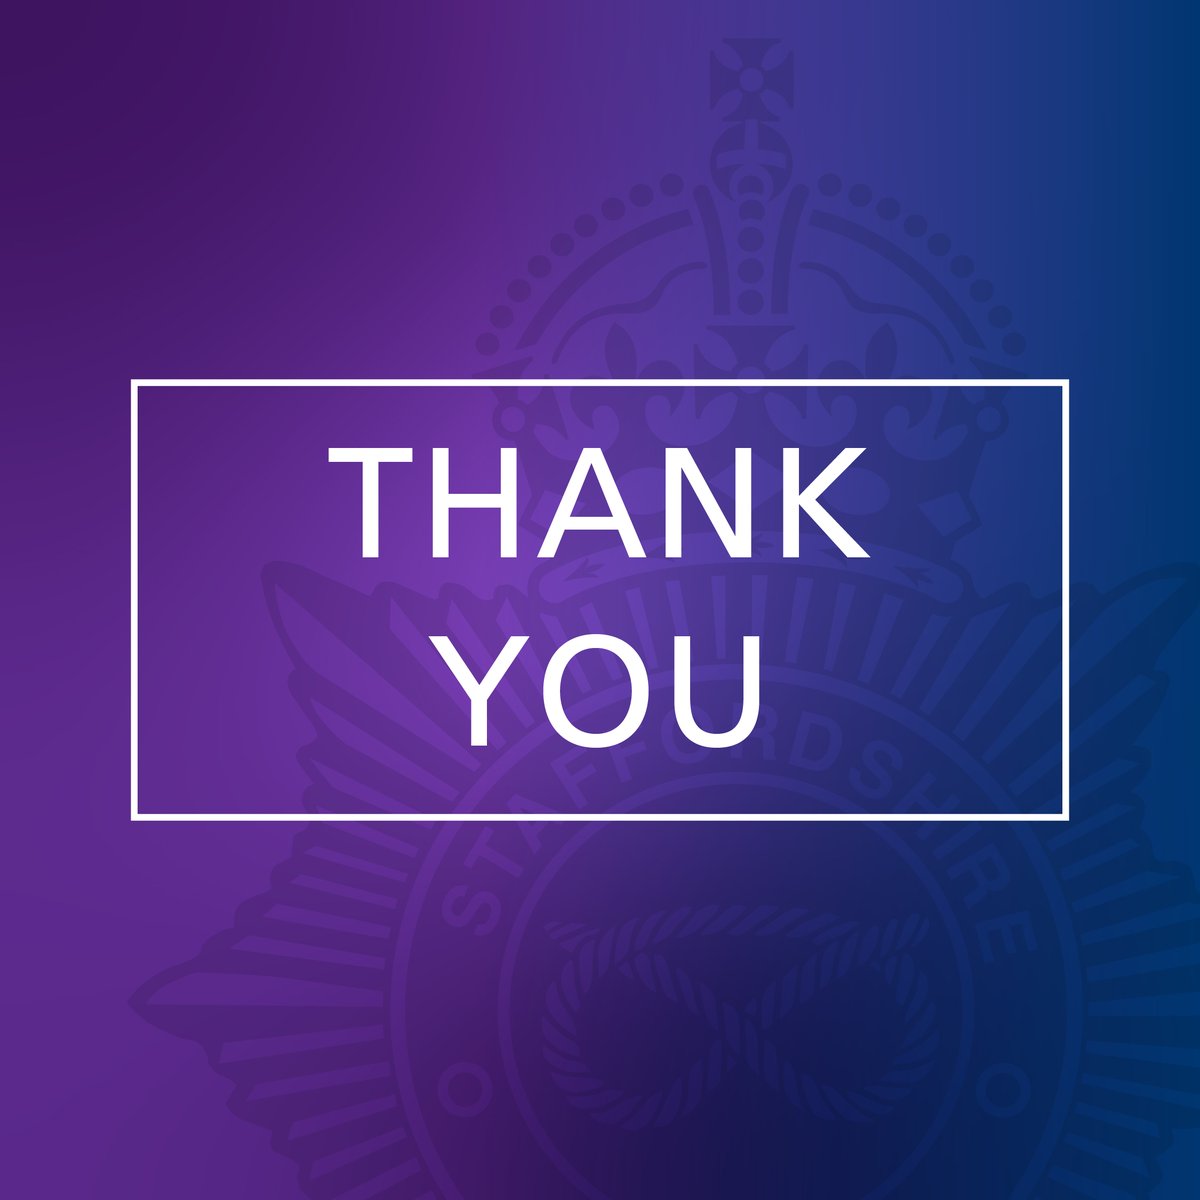 Missing Ruby, from Burton, has been found. Thank you for sharing our appeal.